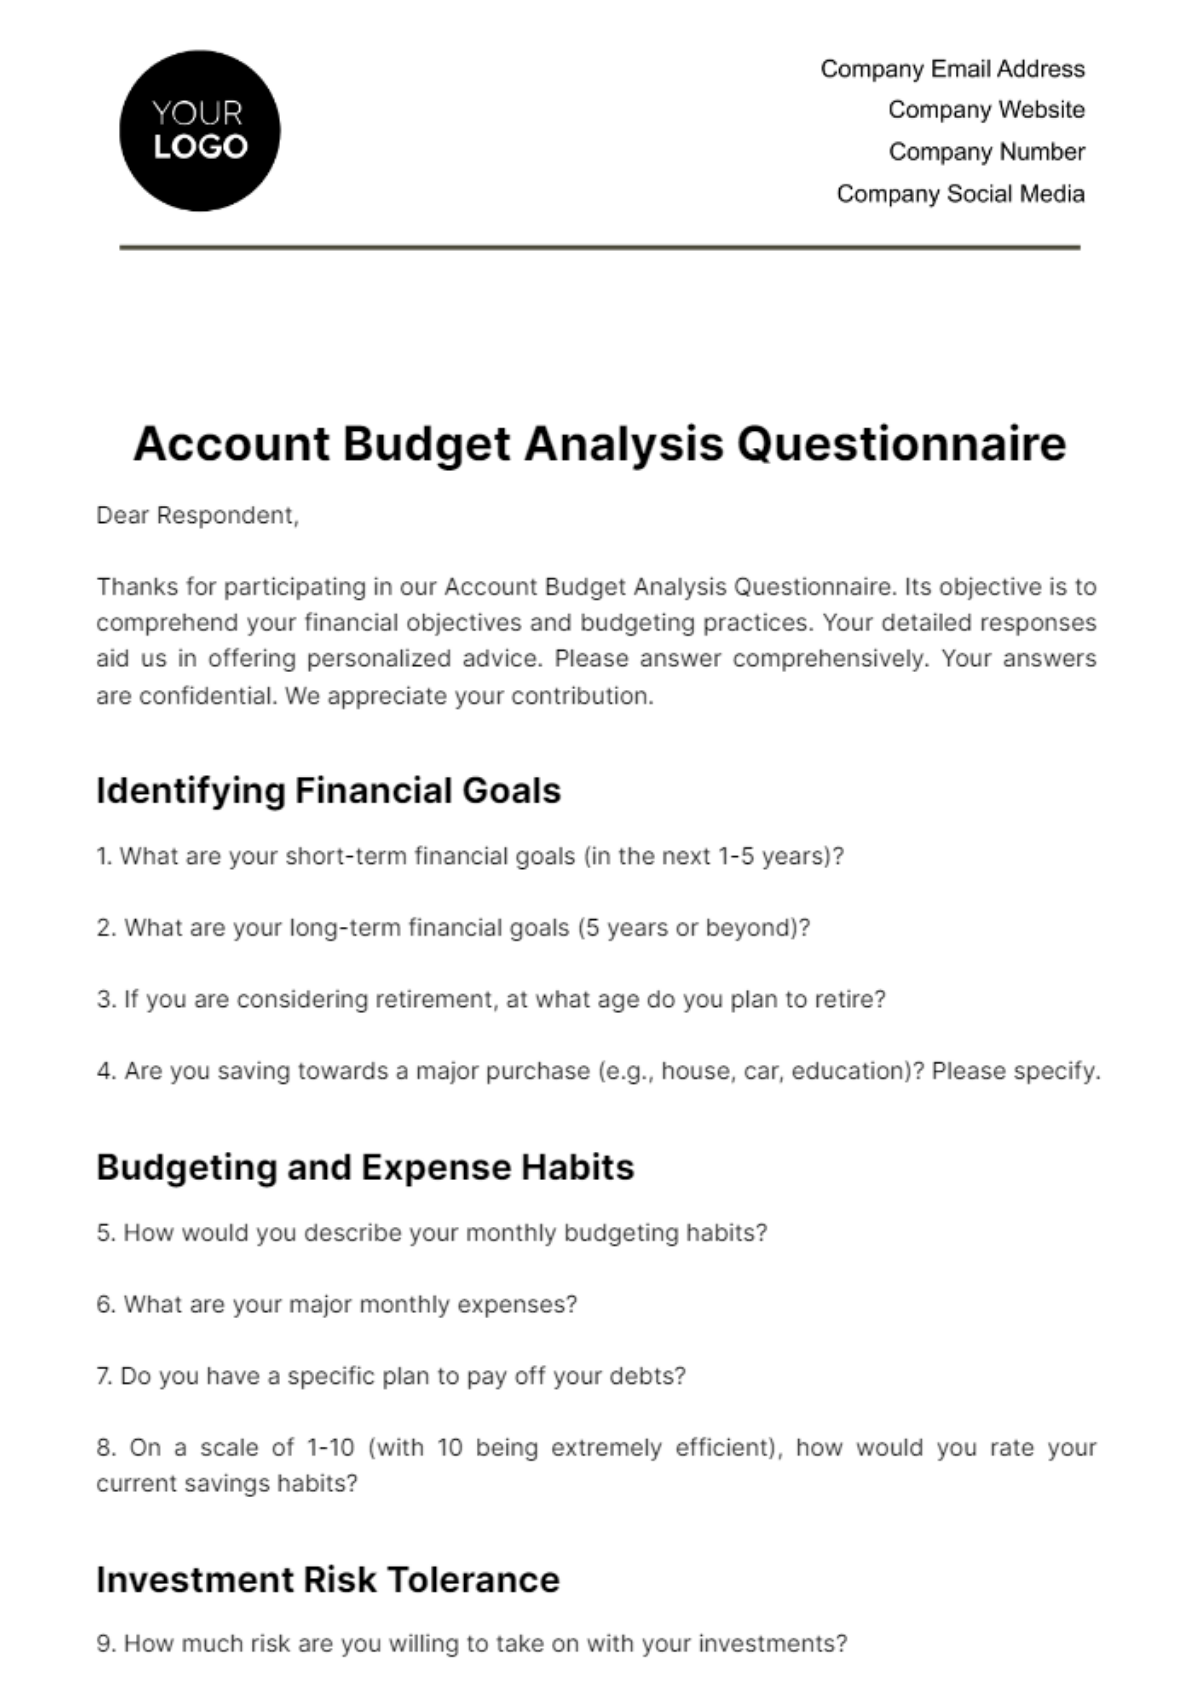 Account Budget Analysis Questionnaire Template